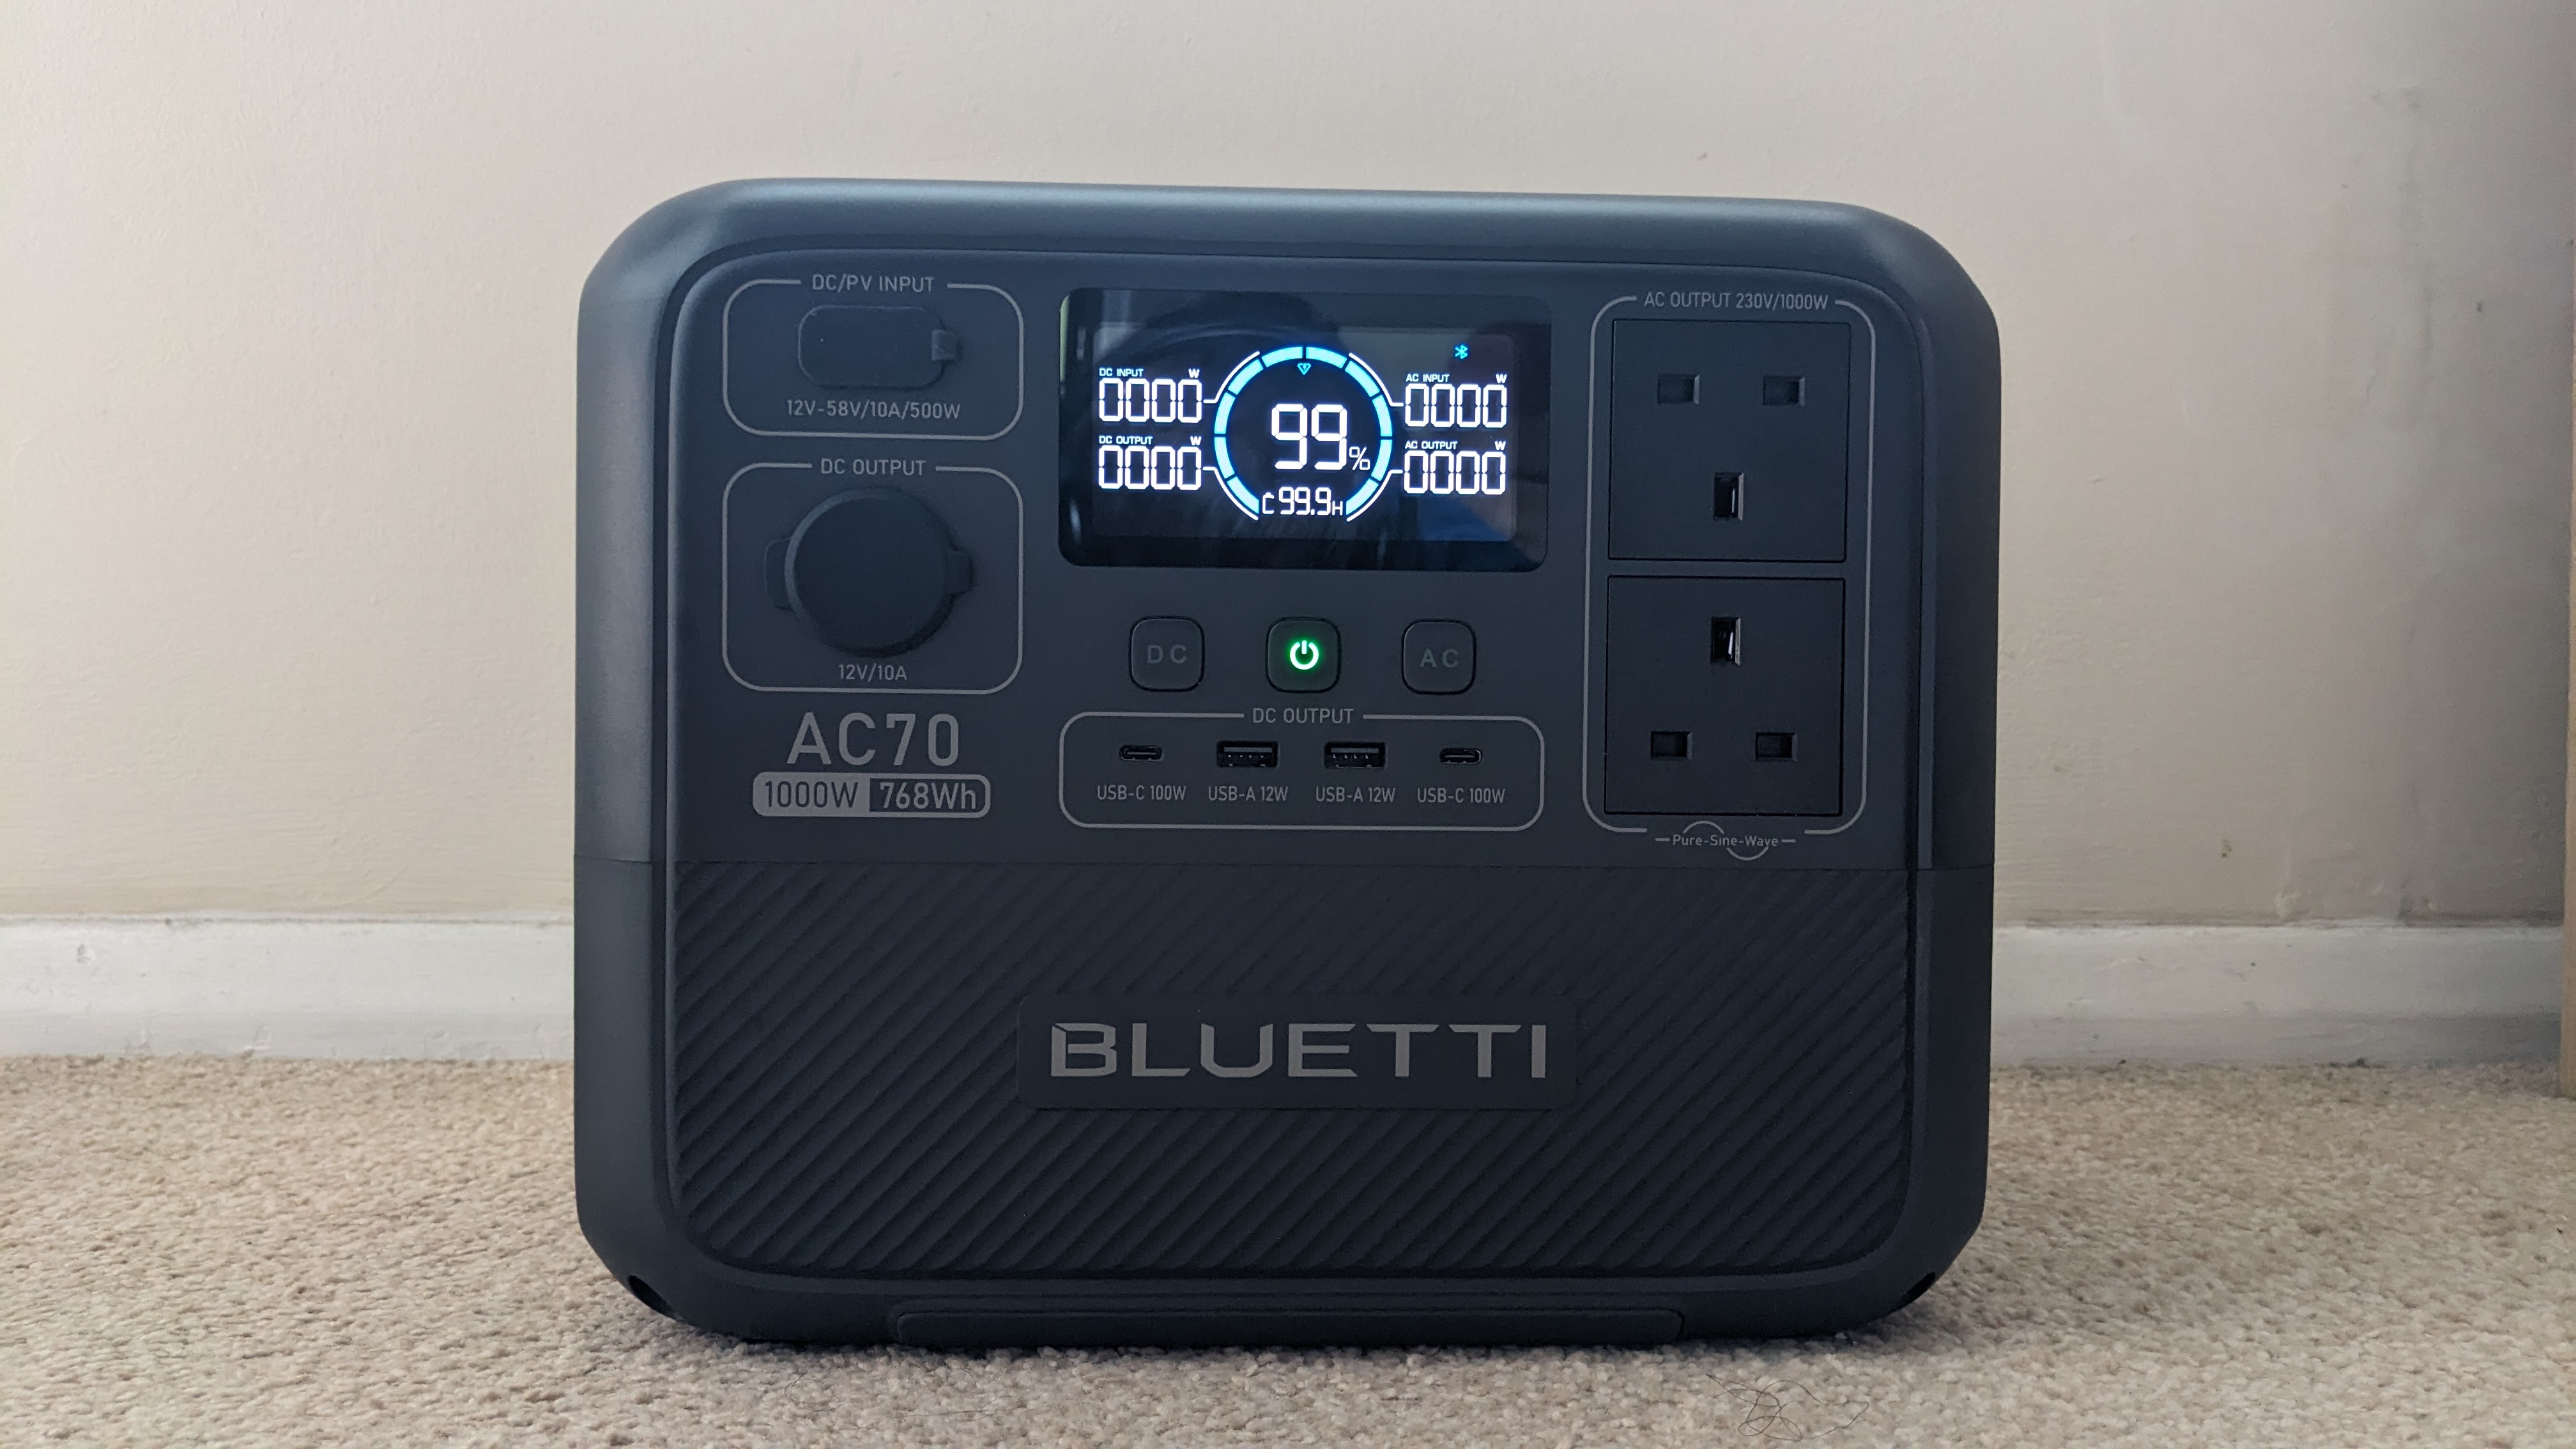 Bluetti AC70 during our test and review process